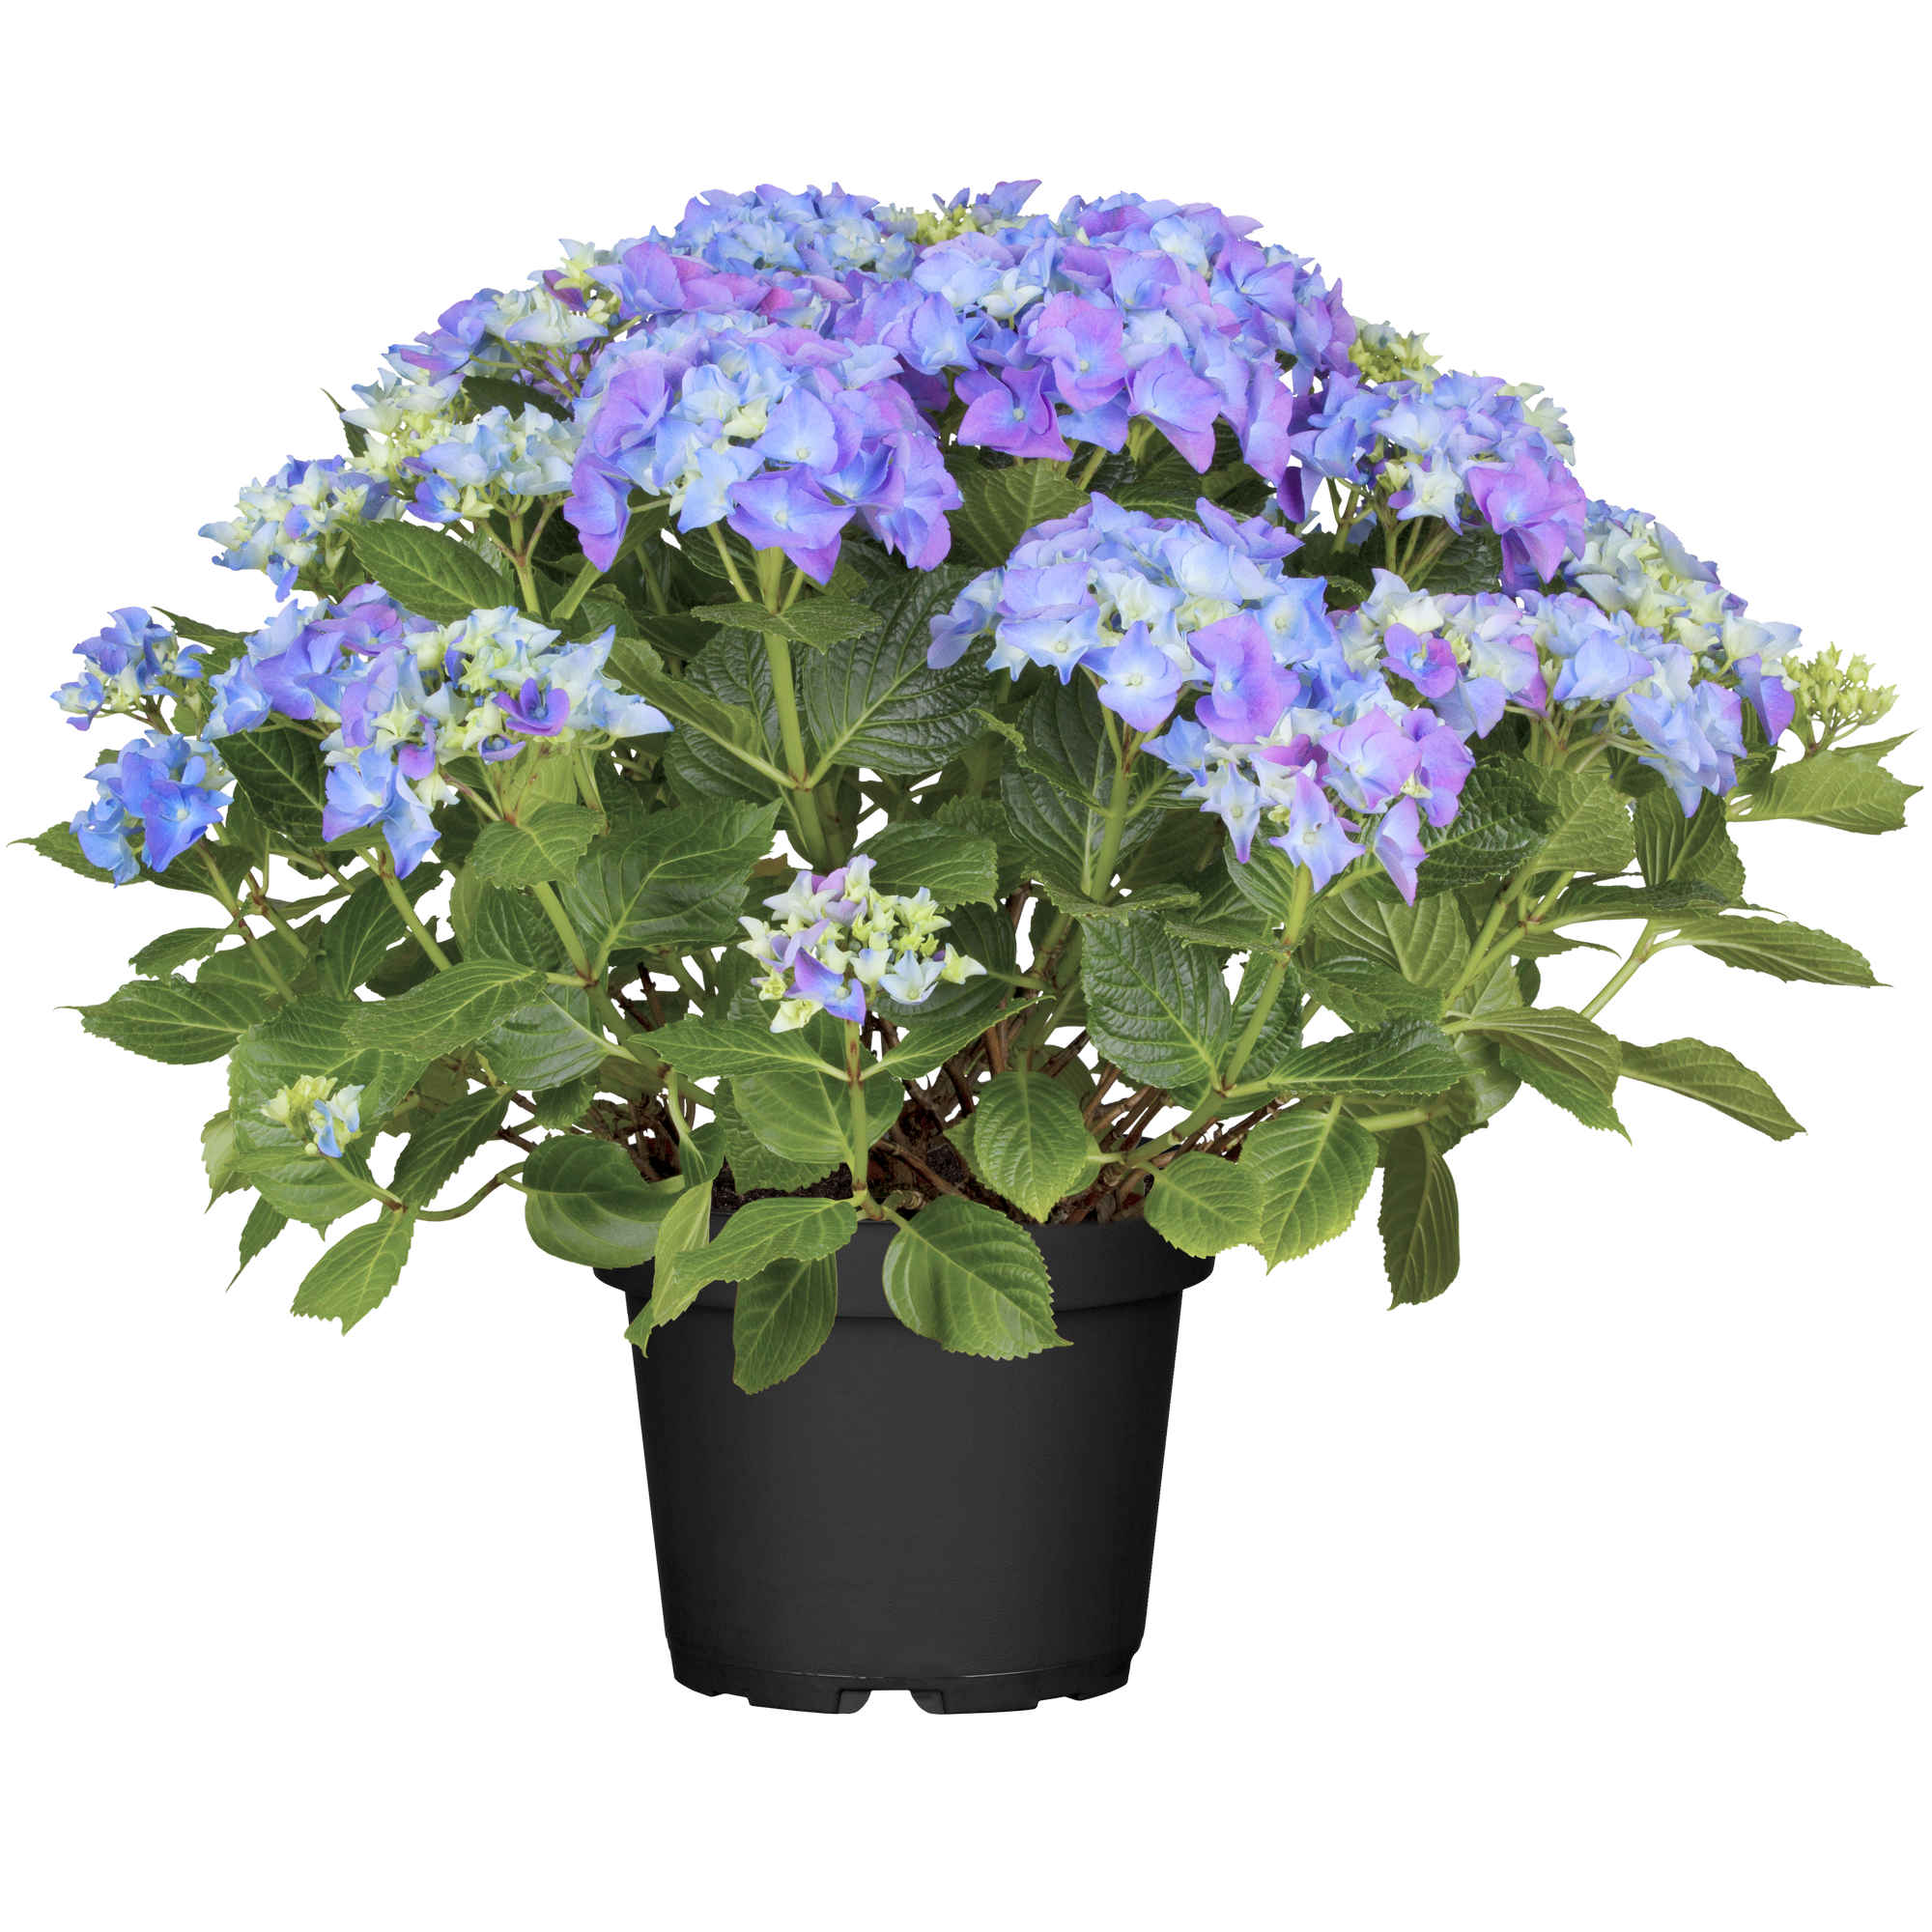 Hortensie 'Royalty® Amor' Topf Ø 23 cm + product picture